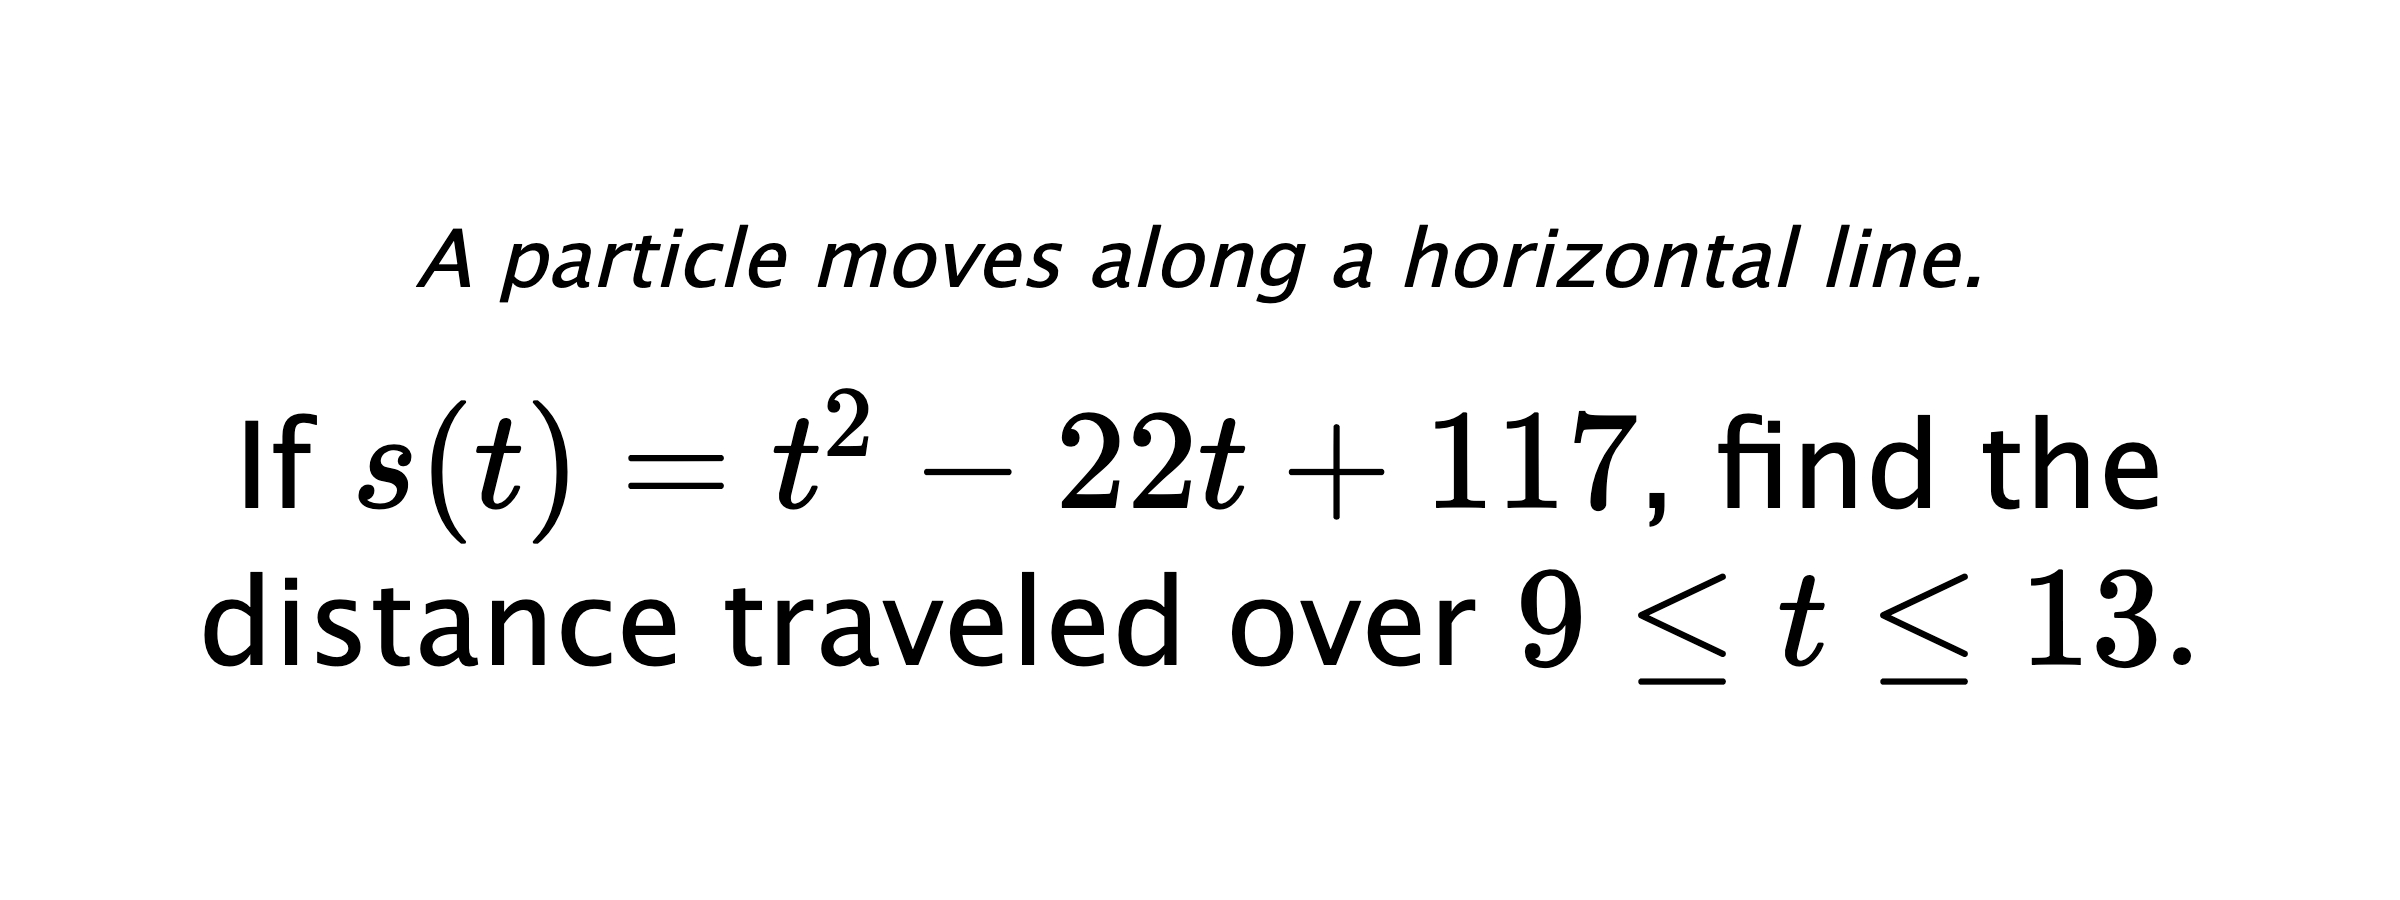 A particle moves along a horizontal line. If $ s(t)=t^2-22t+117 $, find the distance traveled over $ 9 \leq t \leq 13. $